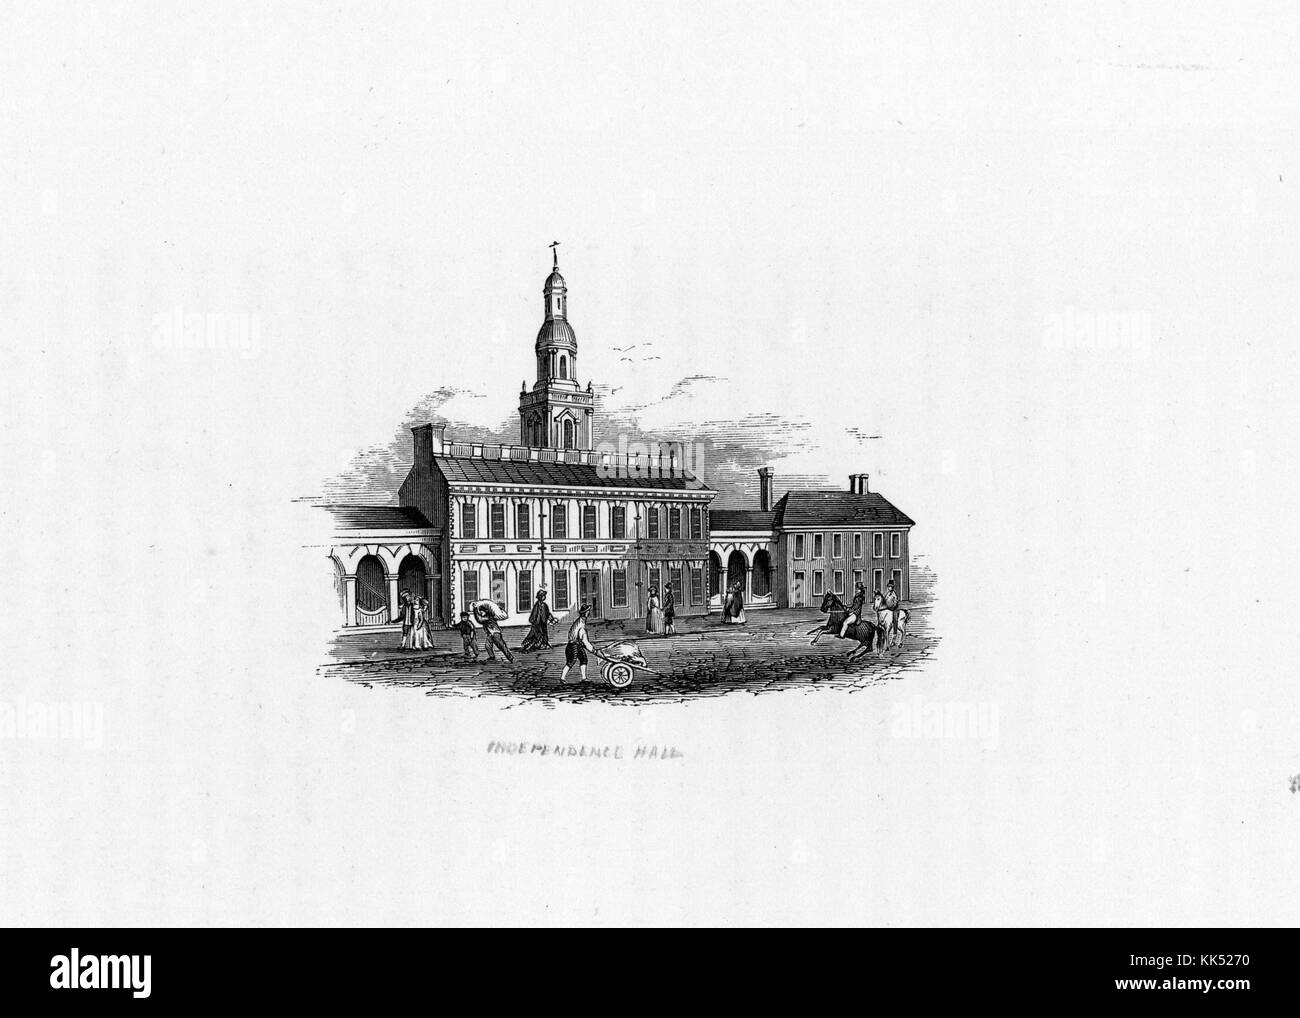 An engraving from a painting of Independence Hall, both the United States Declaration of Independence and the United States Constitution were debated and signed here, the building was constructed in 1753, the outside of the central building is still original, but most of the rest of the structure has been demolished and rebuilt over time, it has been a UNESCO World Heritage Site since 1979, 1800. From the New York Public Library. Stock Photo